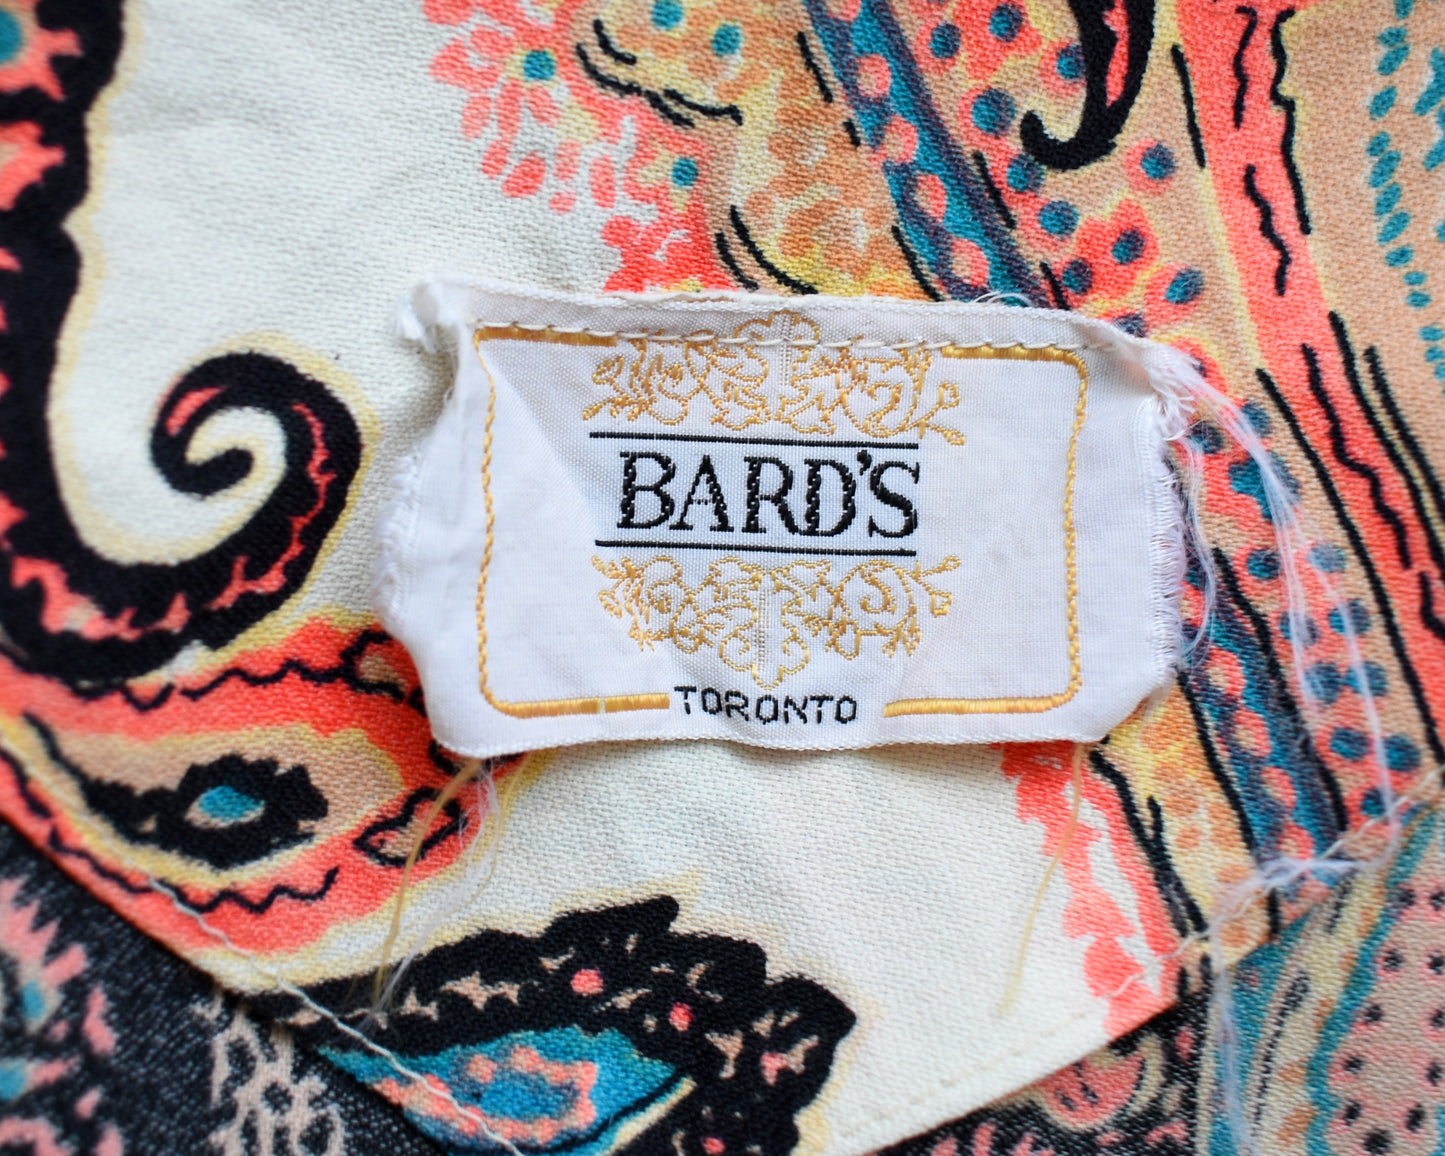 A close up of the tag that says Bard's Toronto